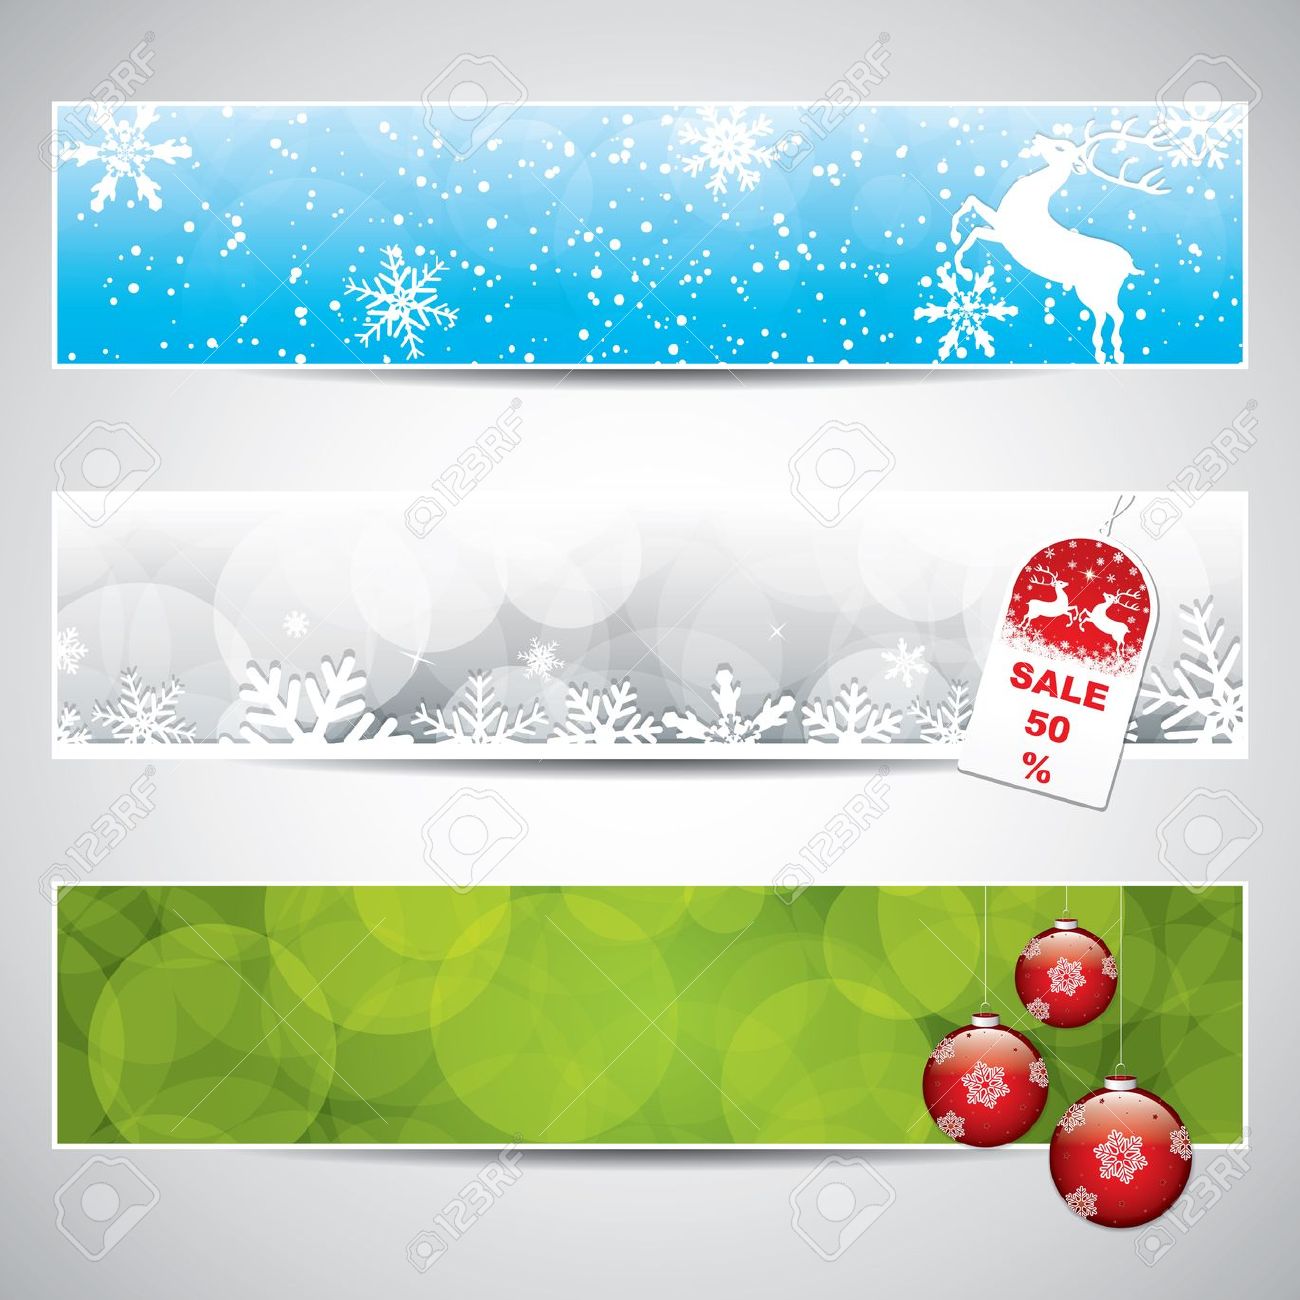 Free Snow Banner Cliparts, Download Free Clip Art, Free Clip